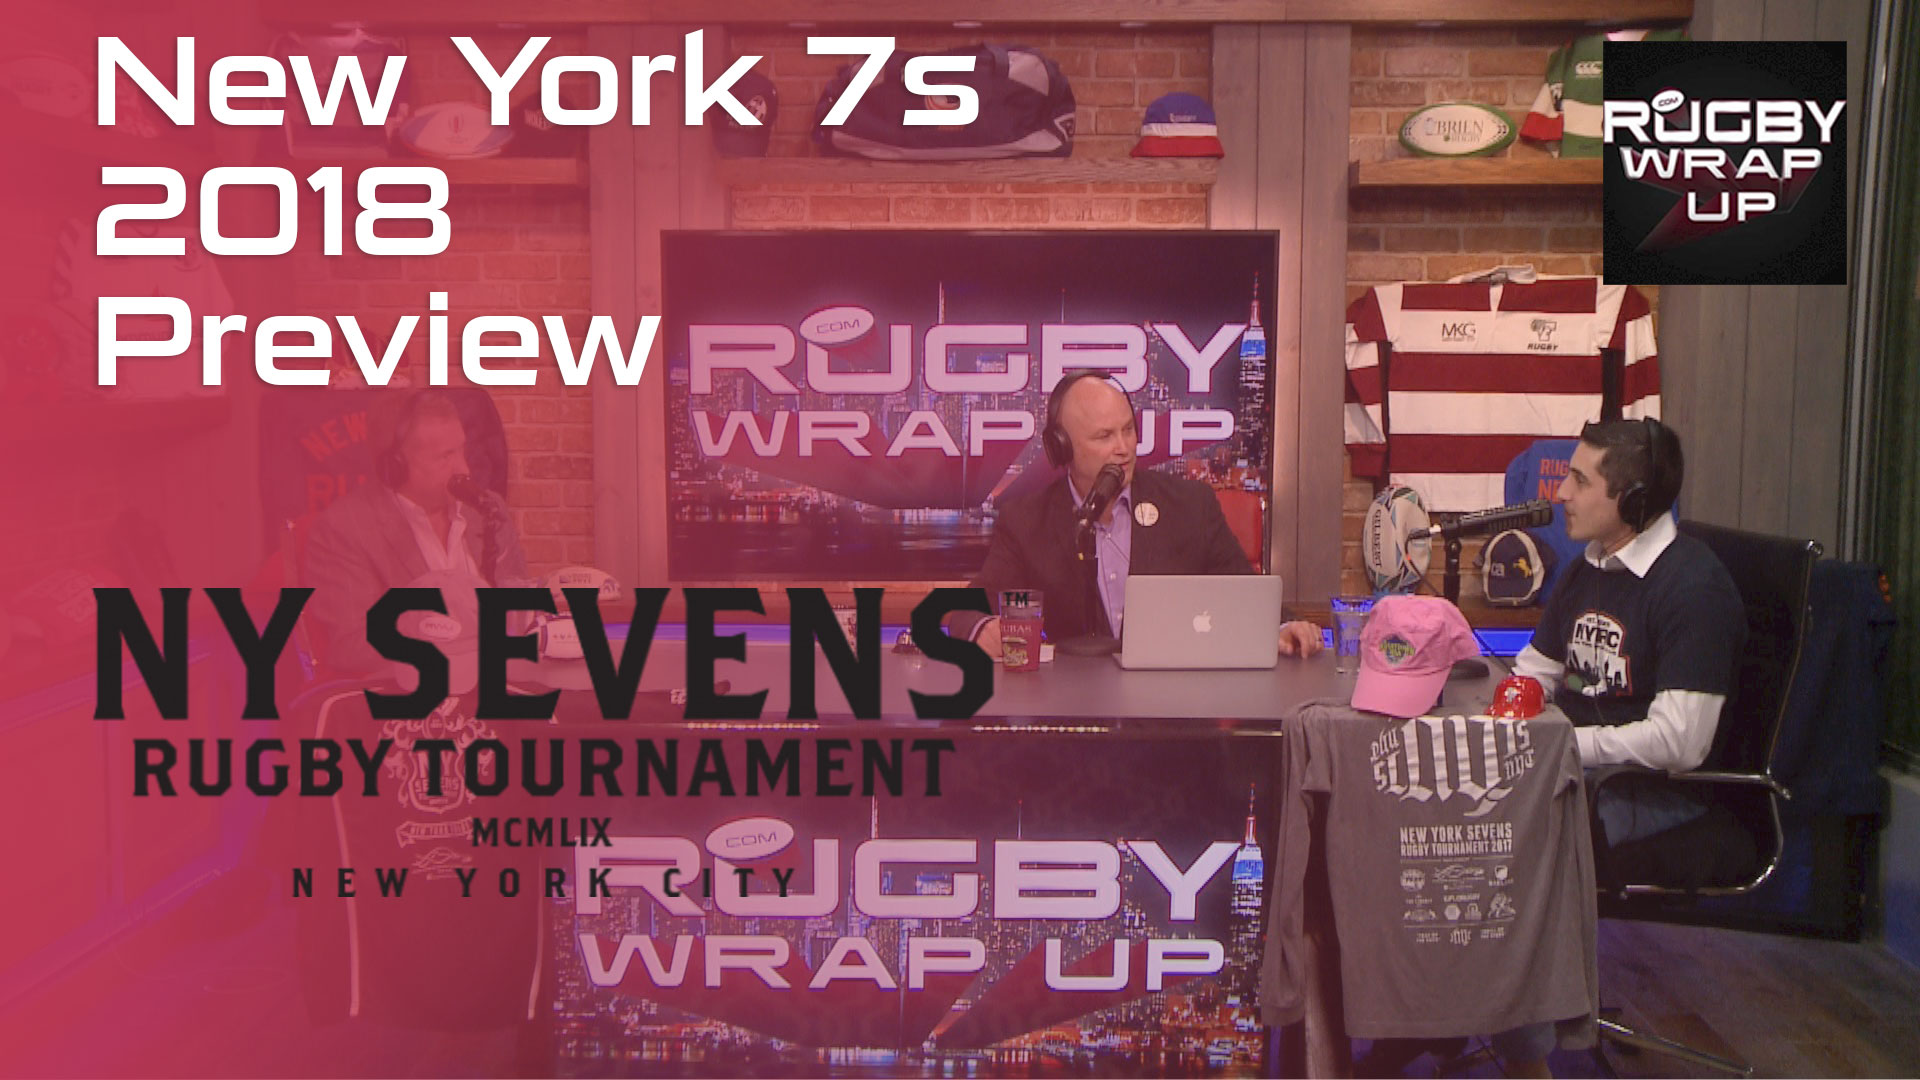 #NY7s. Coolest 7s Tourney Turns 60, High School Player of the Year, Queensland U & USA Rugby